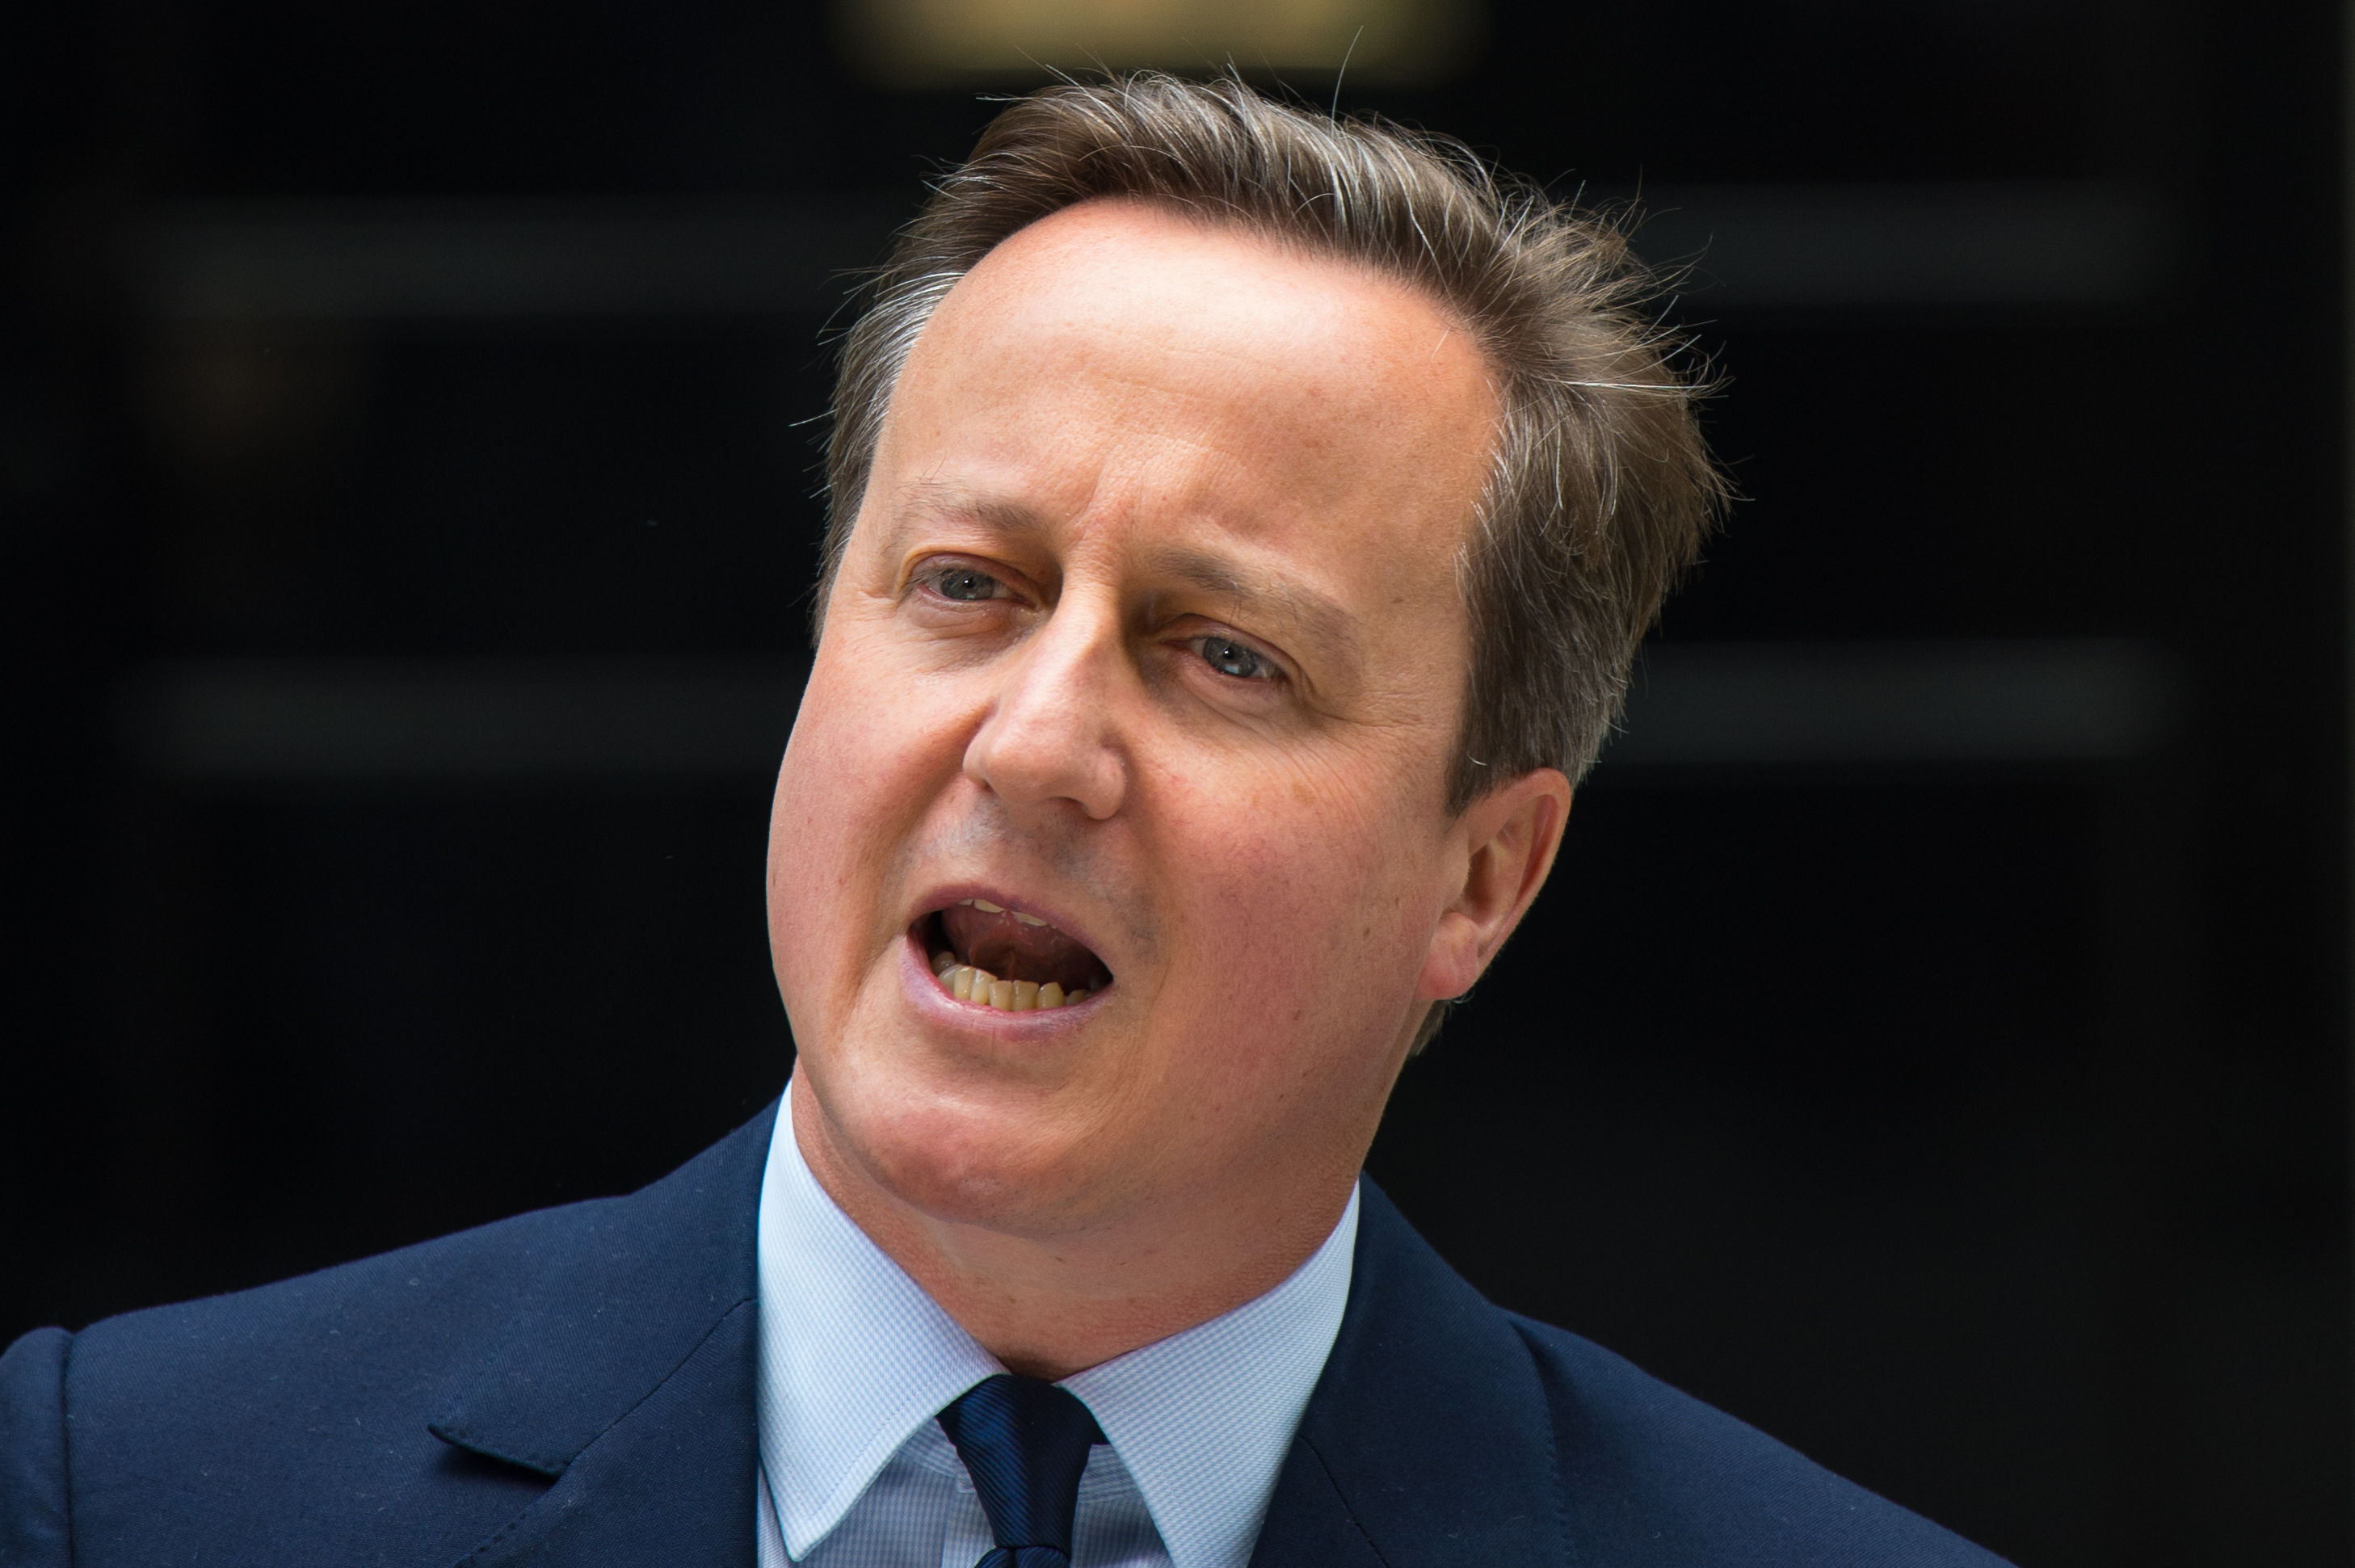 David Cameron approved the pay rises months before his resignation.